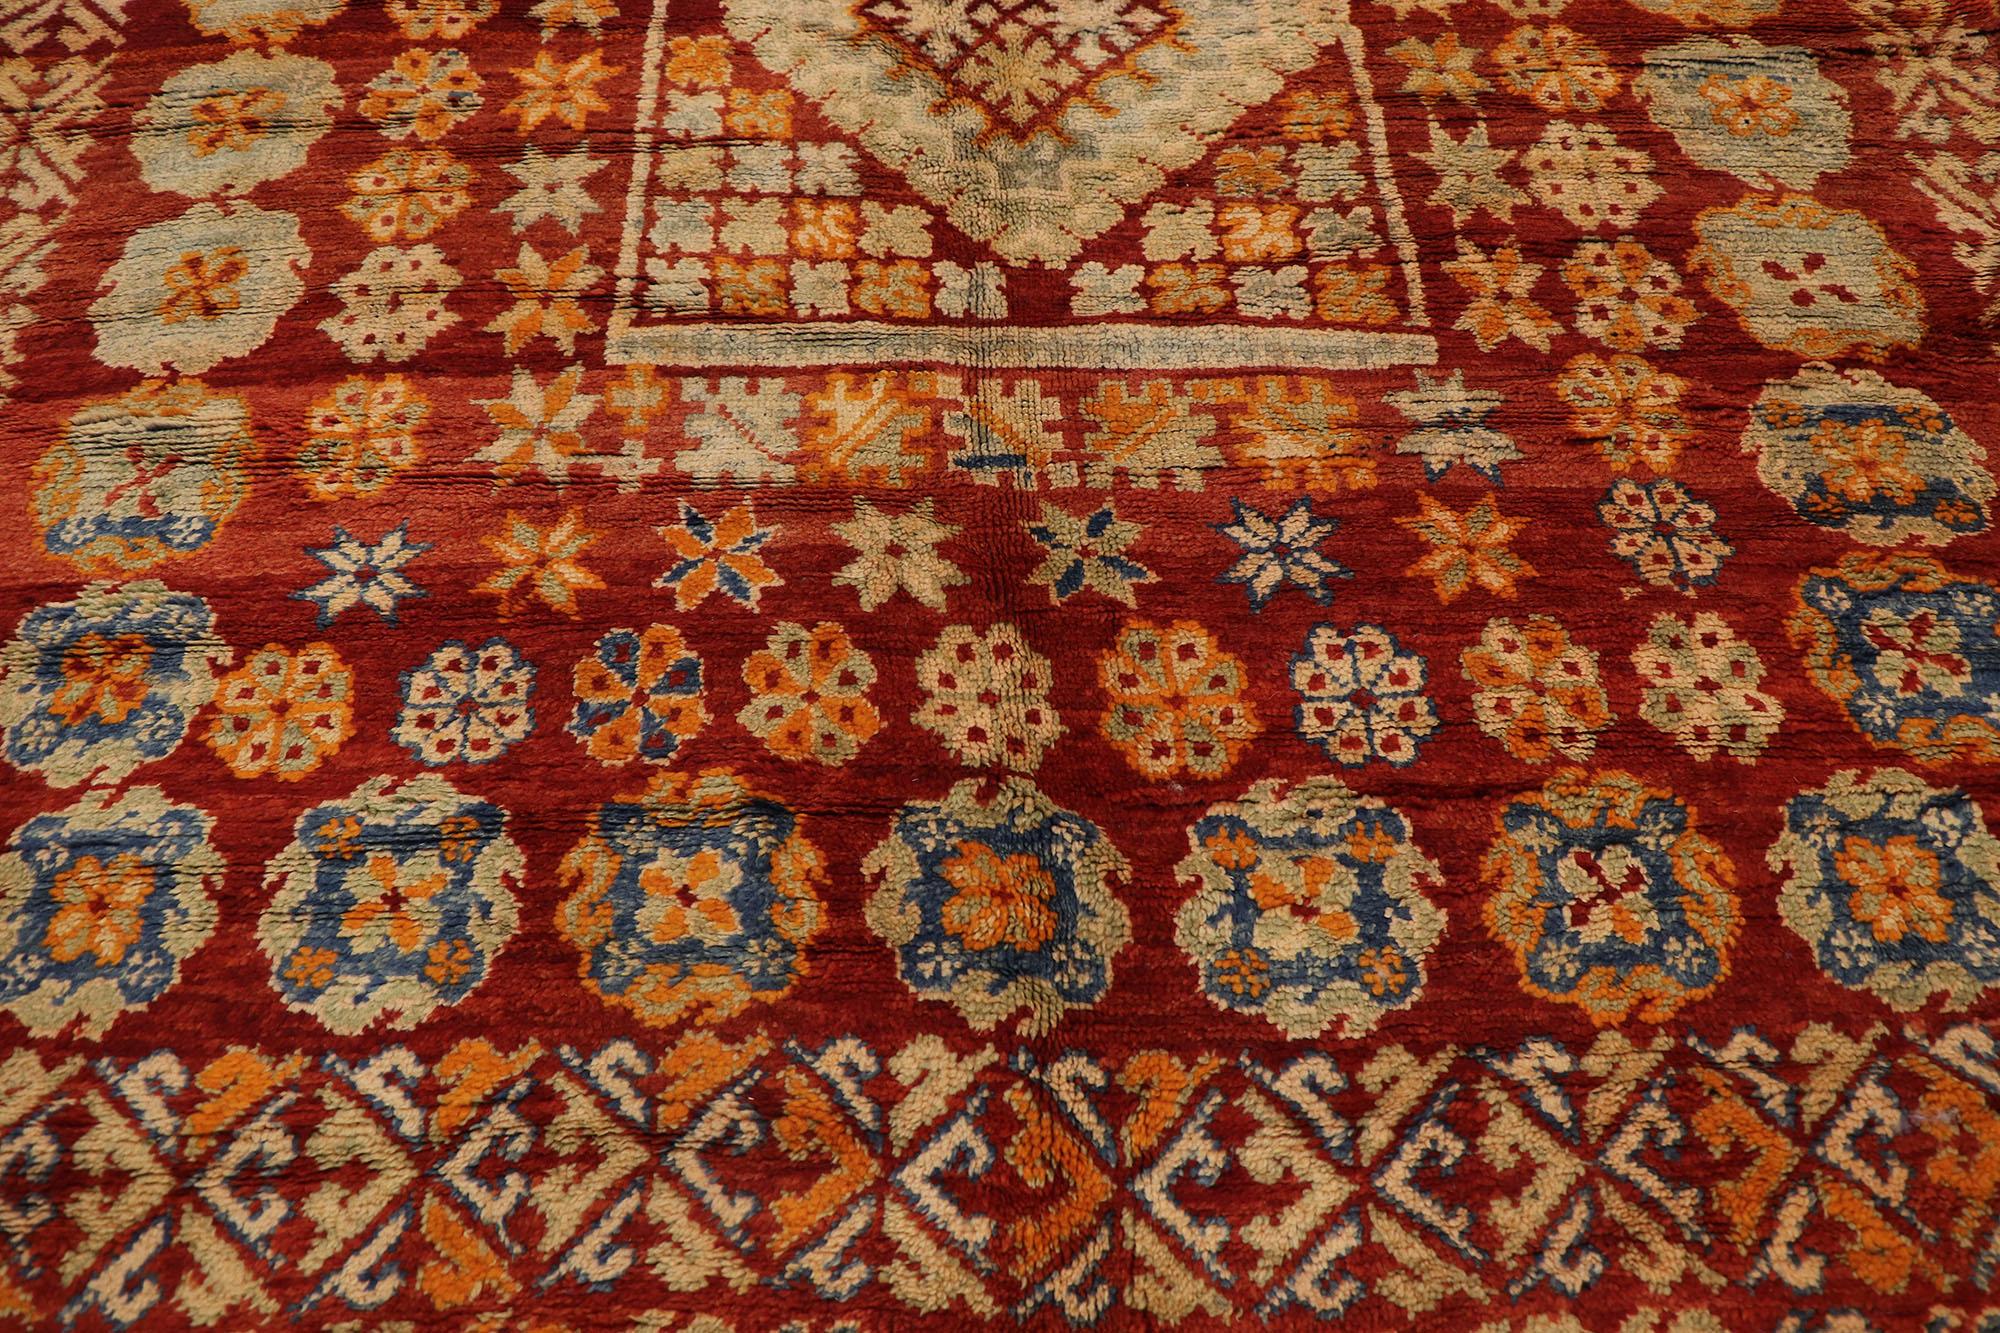 Vintage Moroccan Rug by Berber Tribes of Morocco In Good Condition For Sale In Dallas, TX